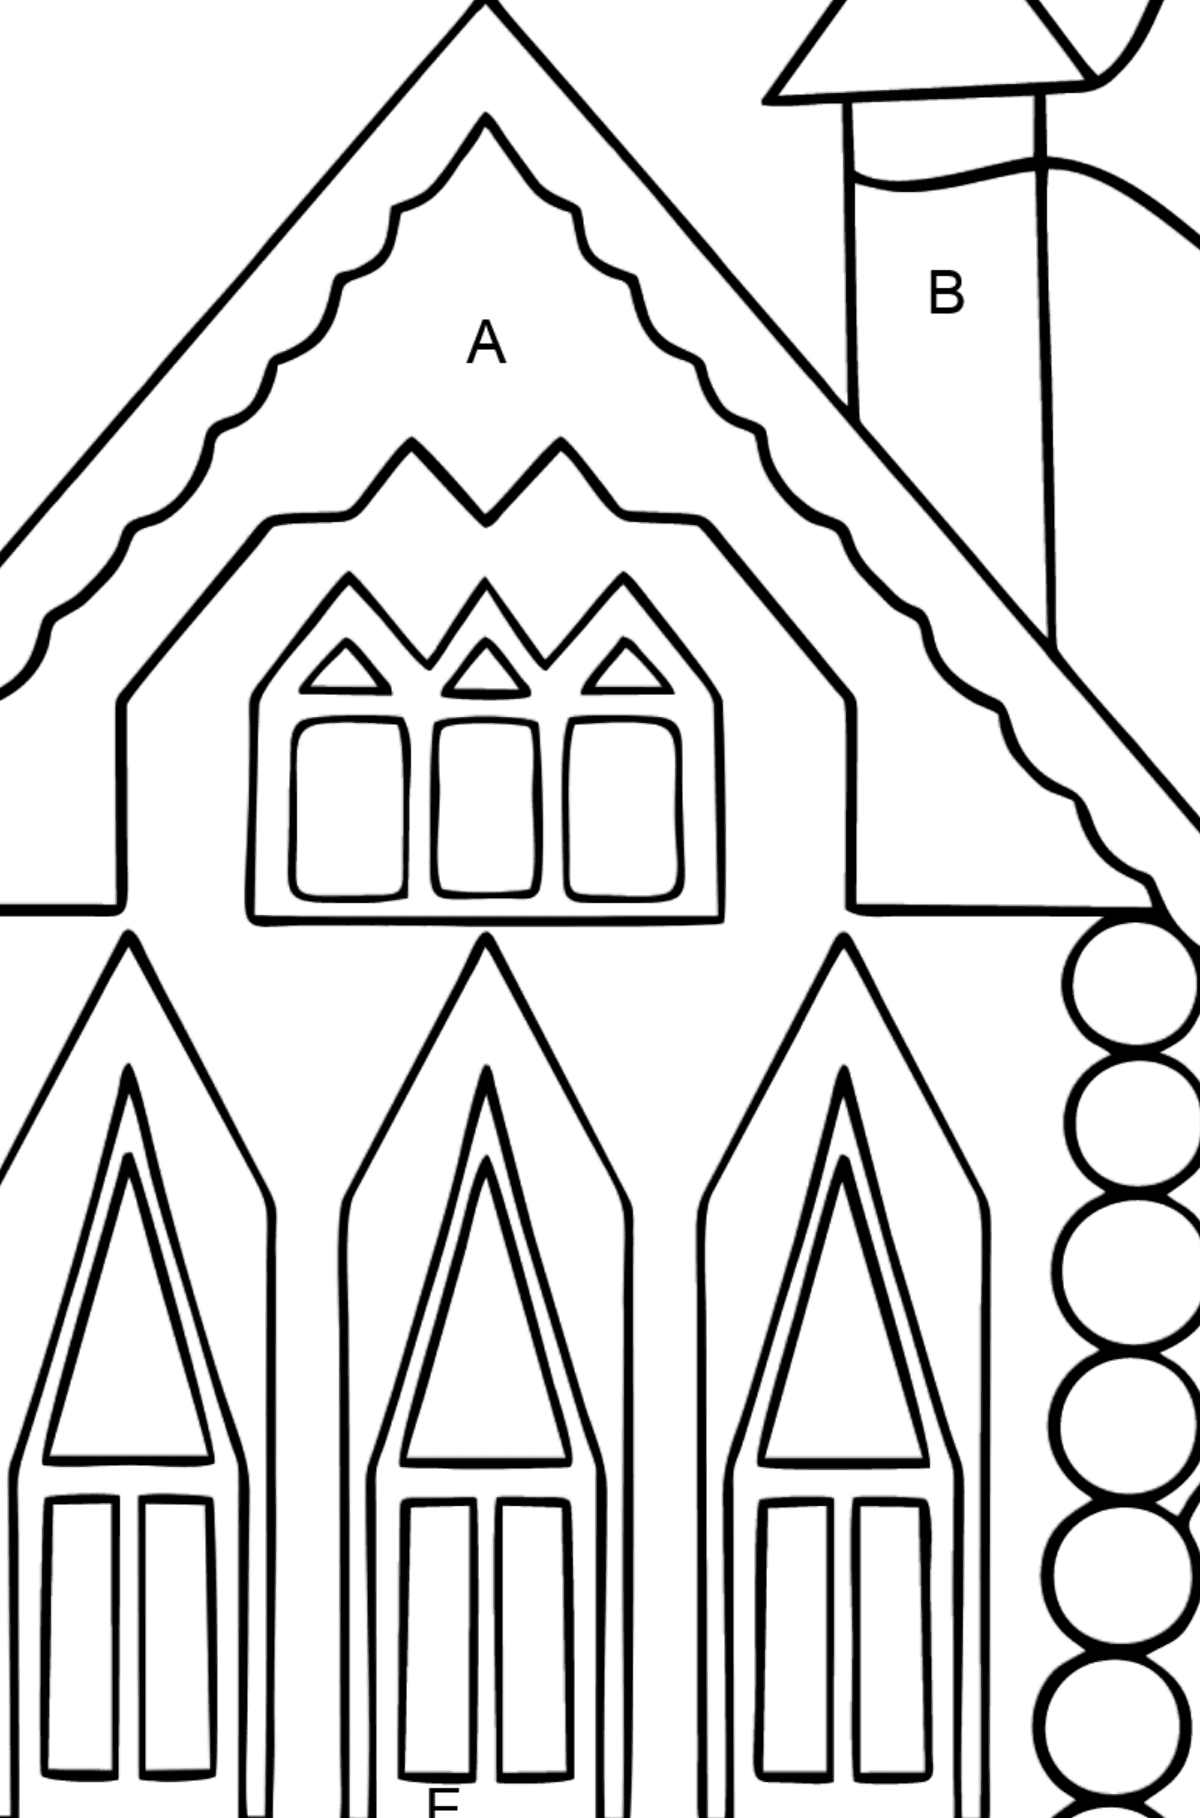 Simple Coloring Page - A Rainbow House - Coloring by Letters for Kids